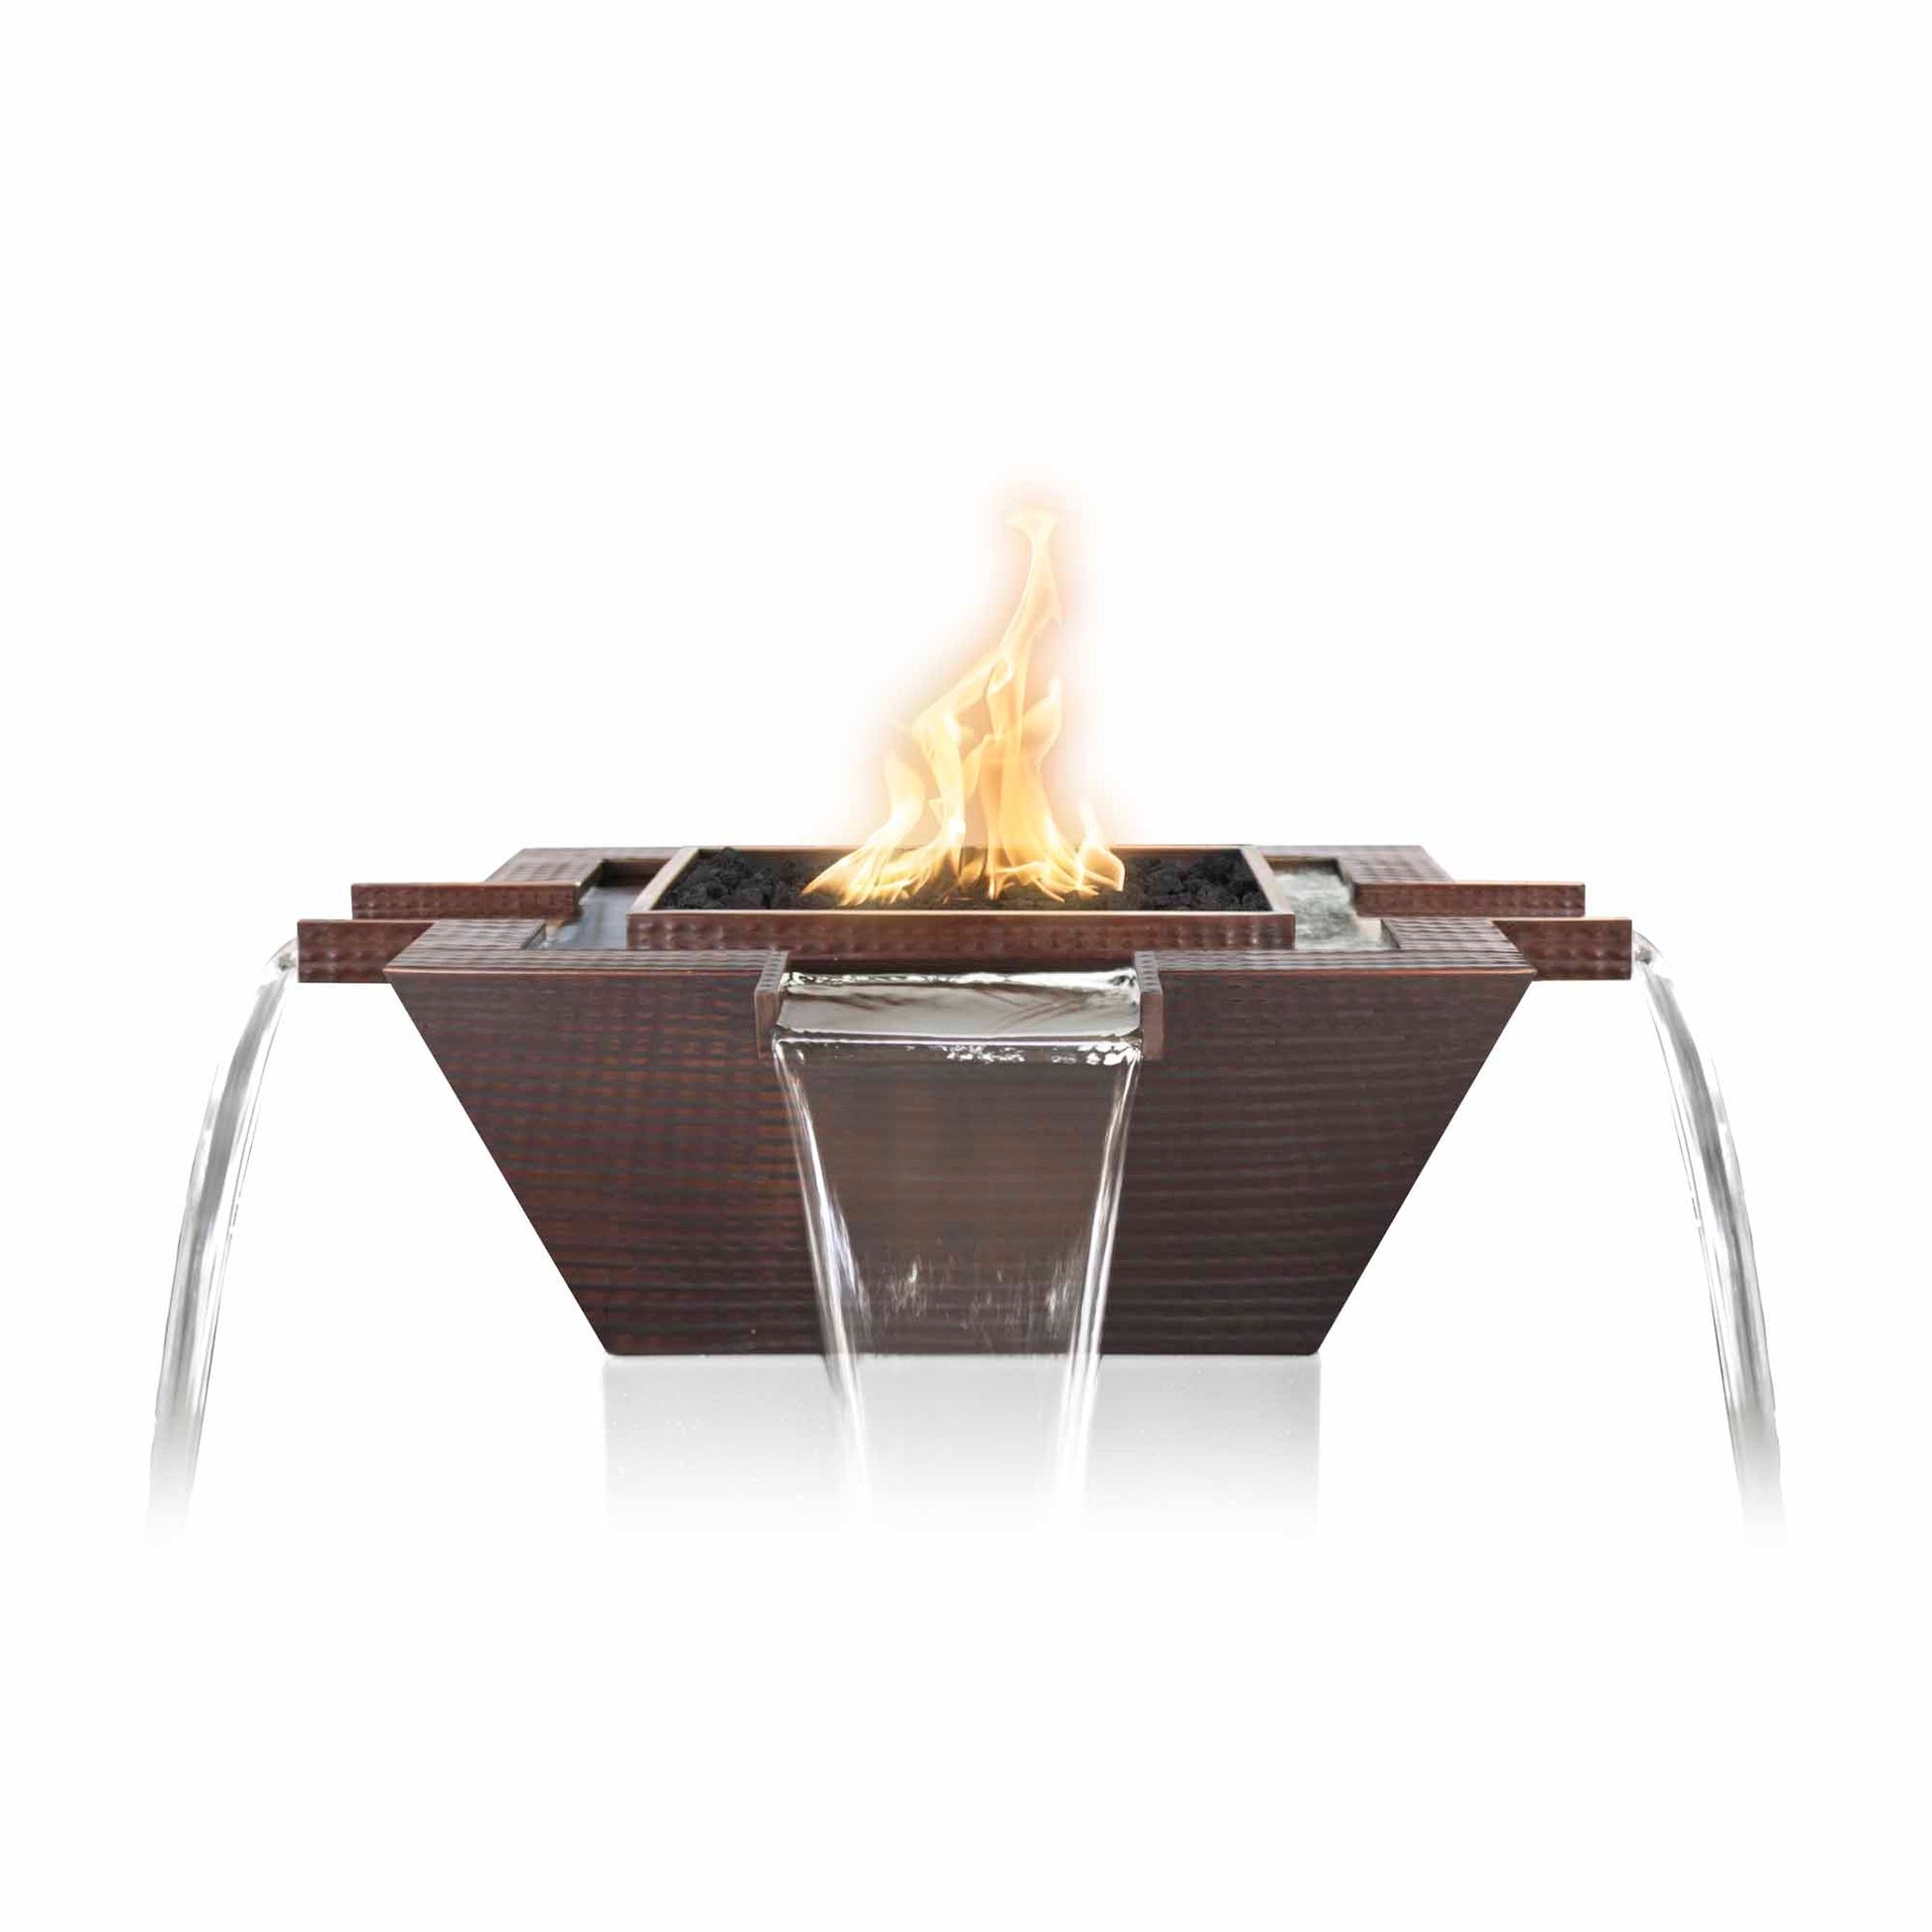 The Outdoor Plus Square Maya 30" Stainless Steel Natural Gas Fire & Water Bowl 4-Way Spill with Match Lit Ignition